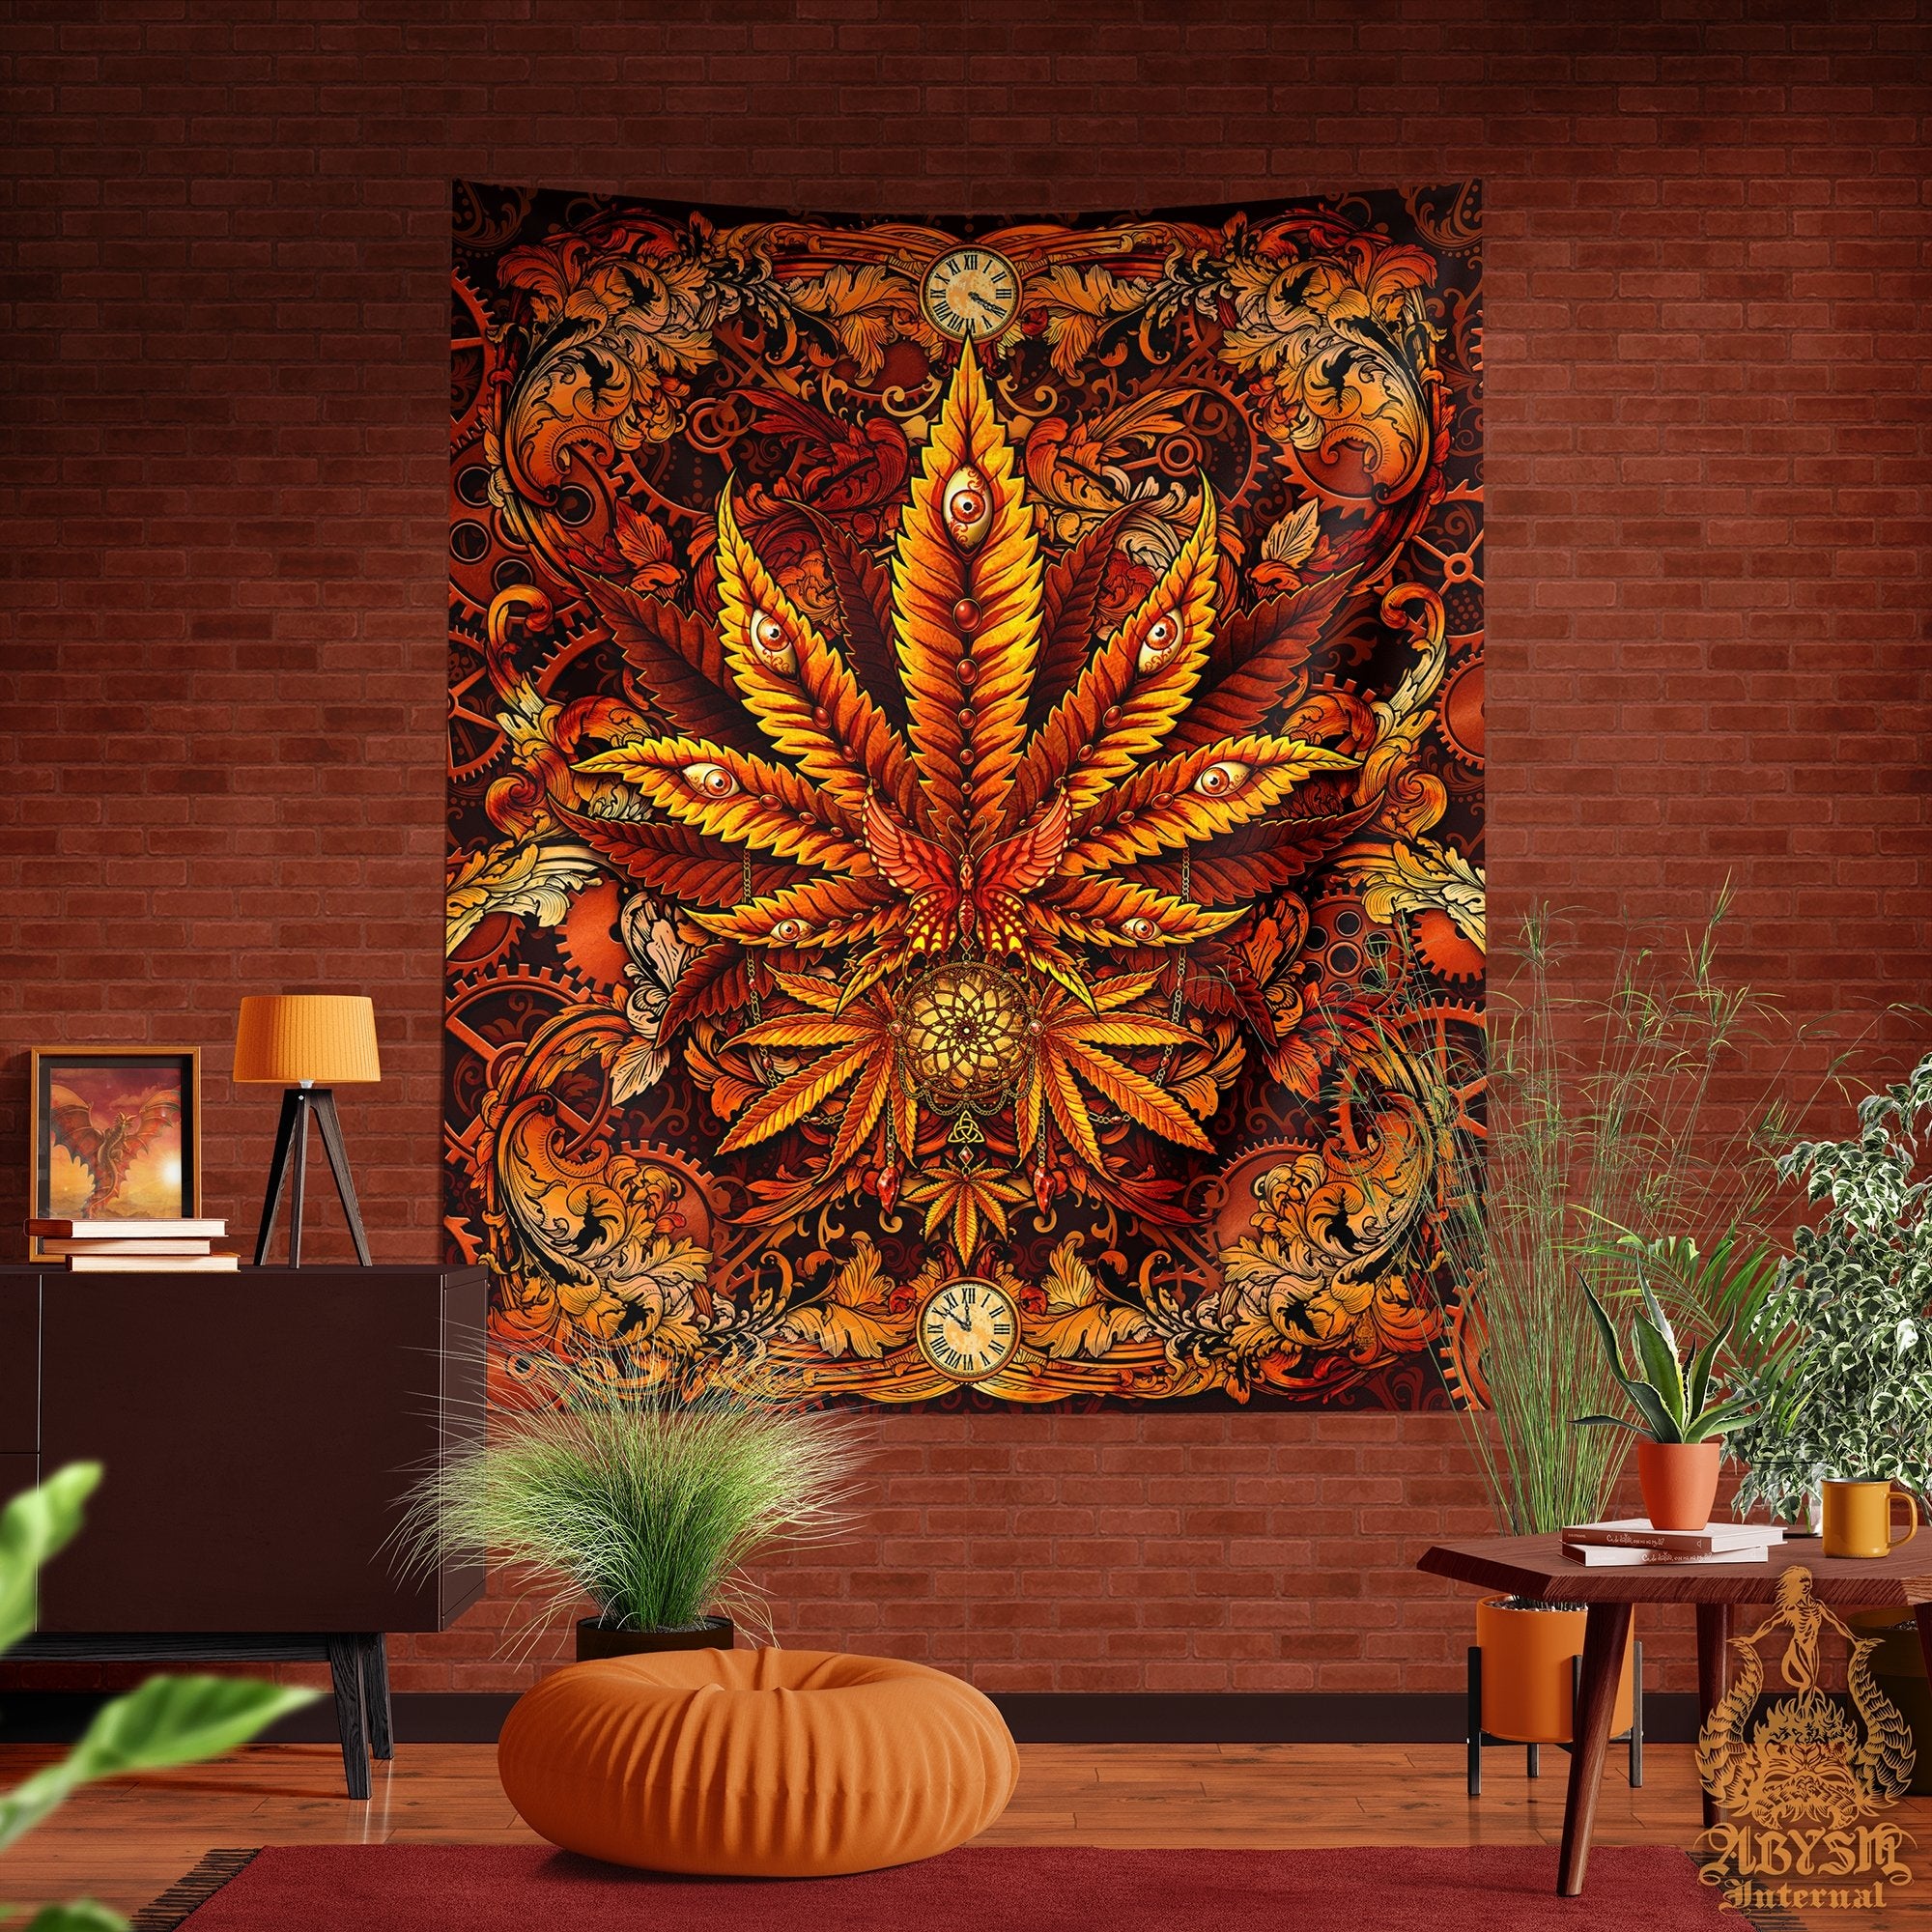 Weed Tapestry, Cannabis Shop Decor, Marijuana Wall Hanging, Indie Home Decor, Eclectic Art Print, 420 Gift - Steampunk - Abysm Internal